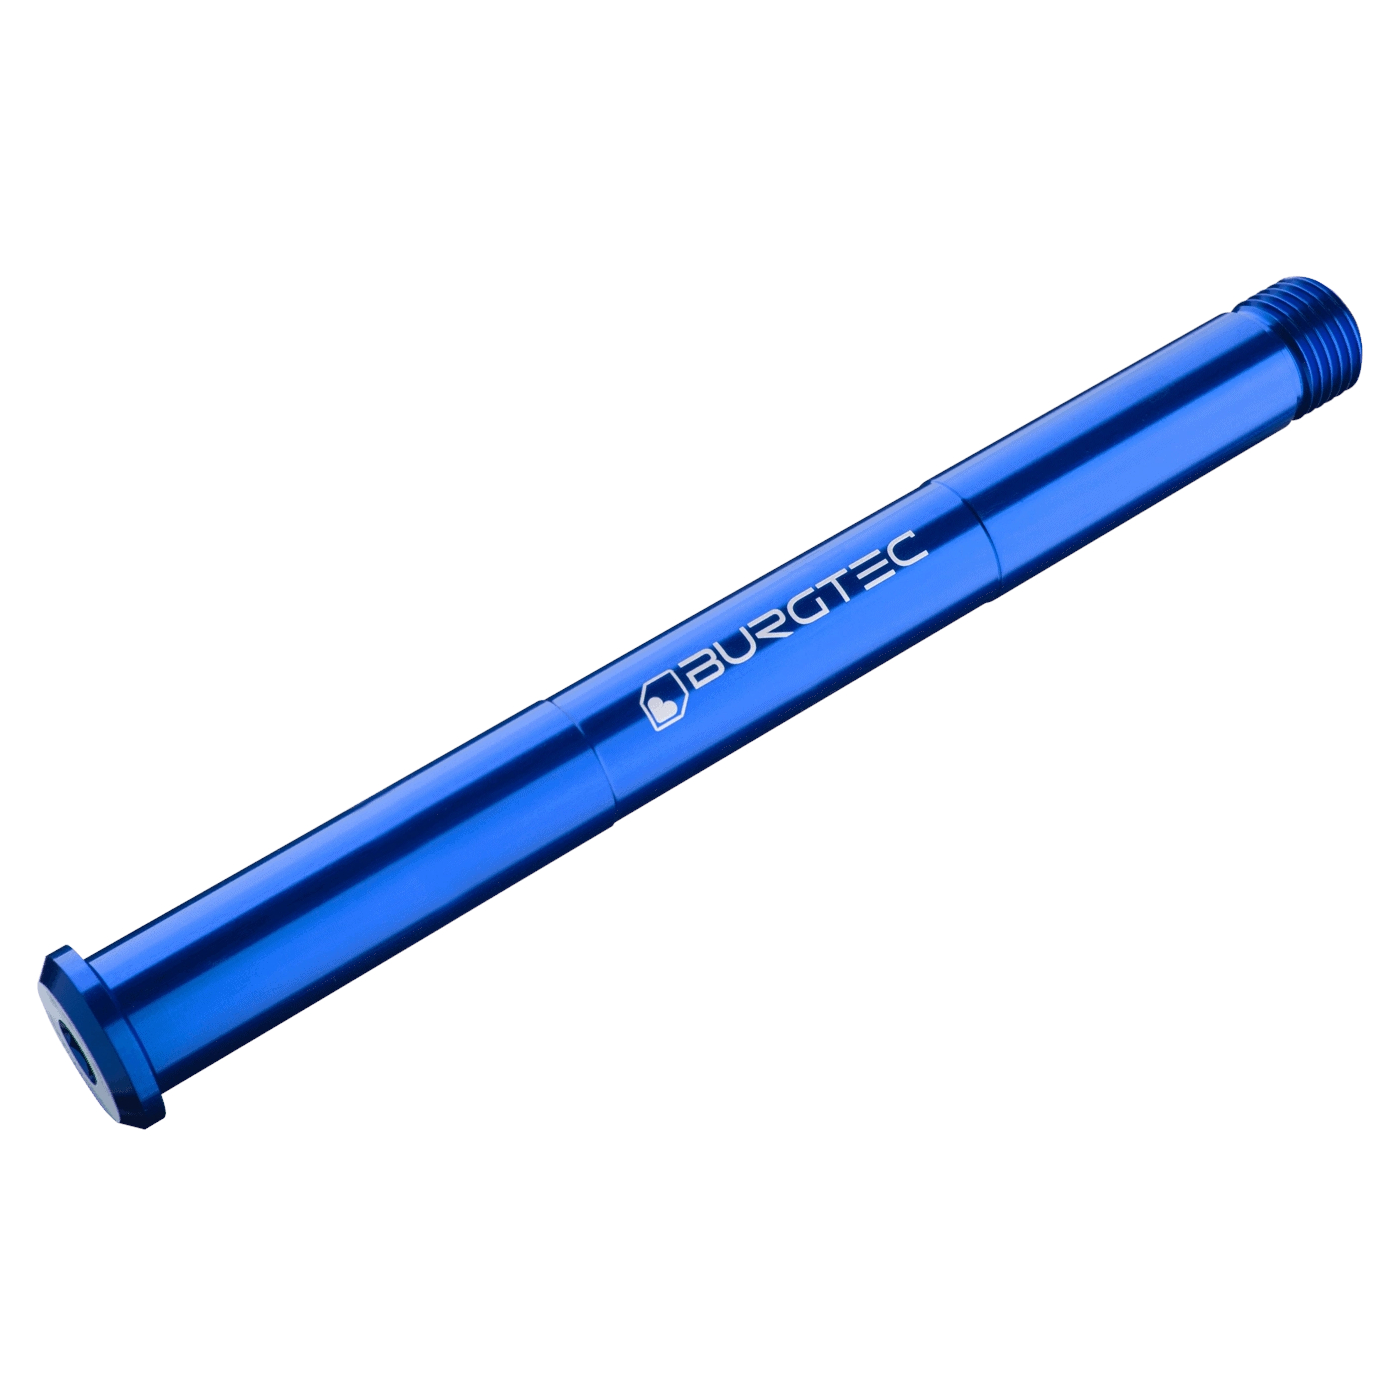 Picture of Burgtec Thru Axle - 15x110mm Boost - for RockShox Forks - Deep Blue